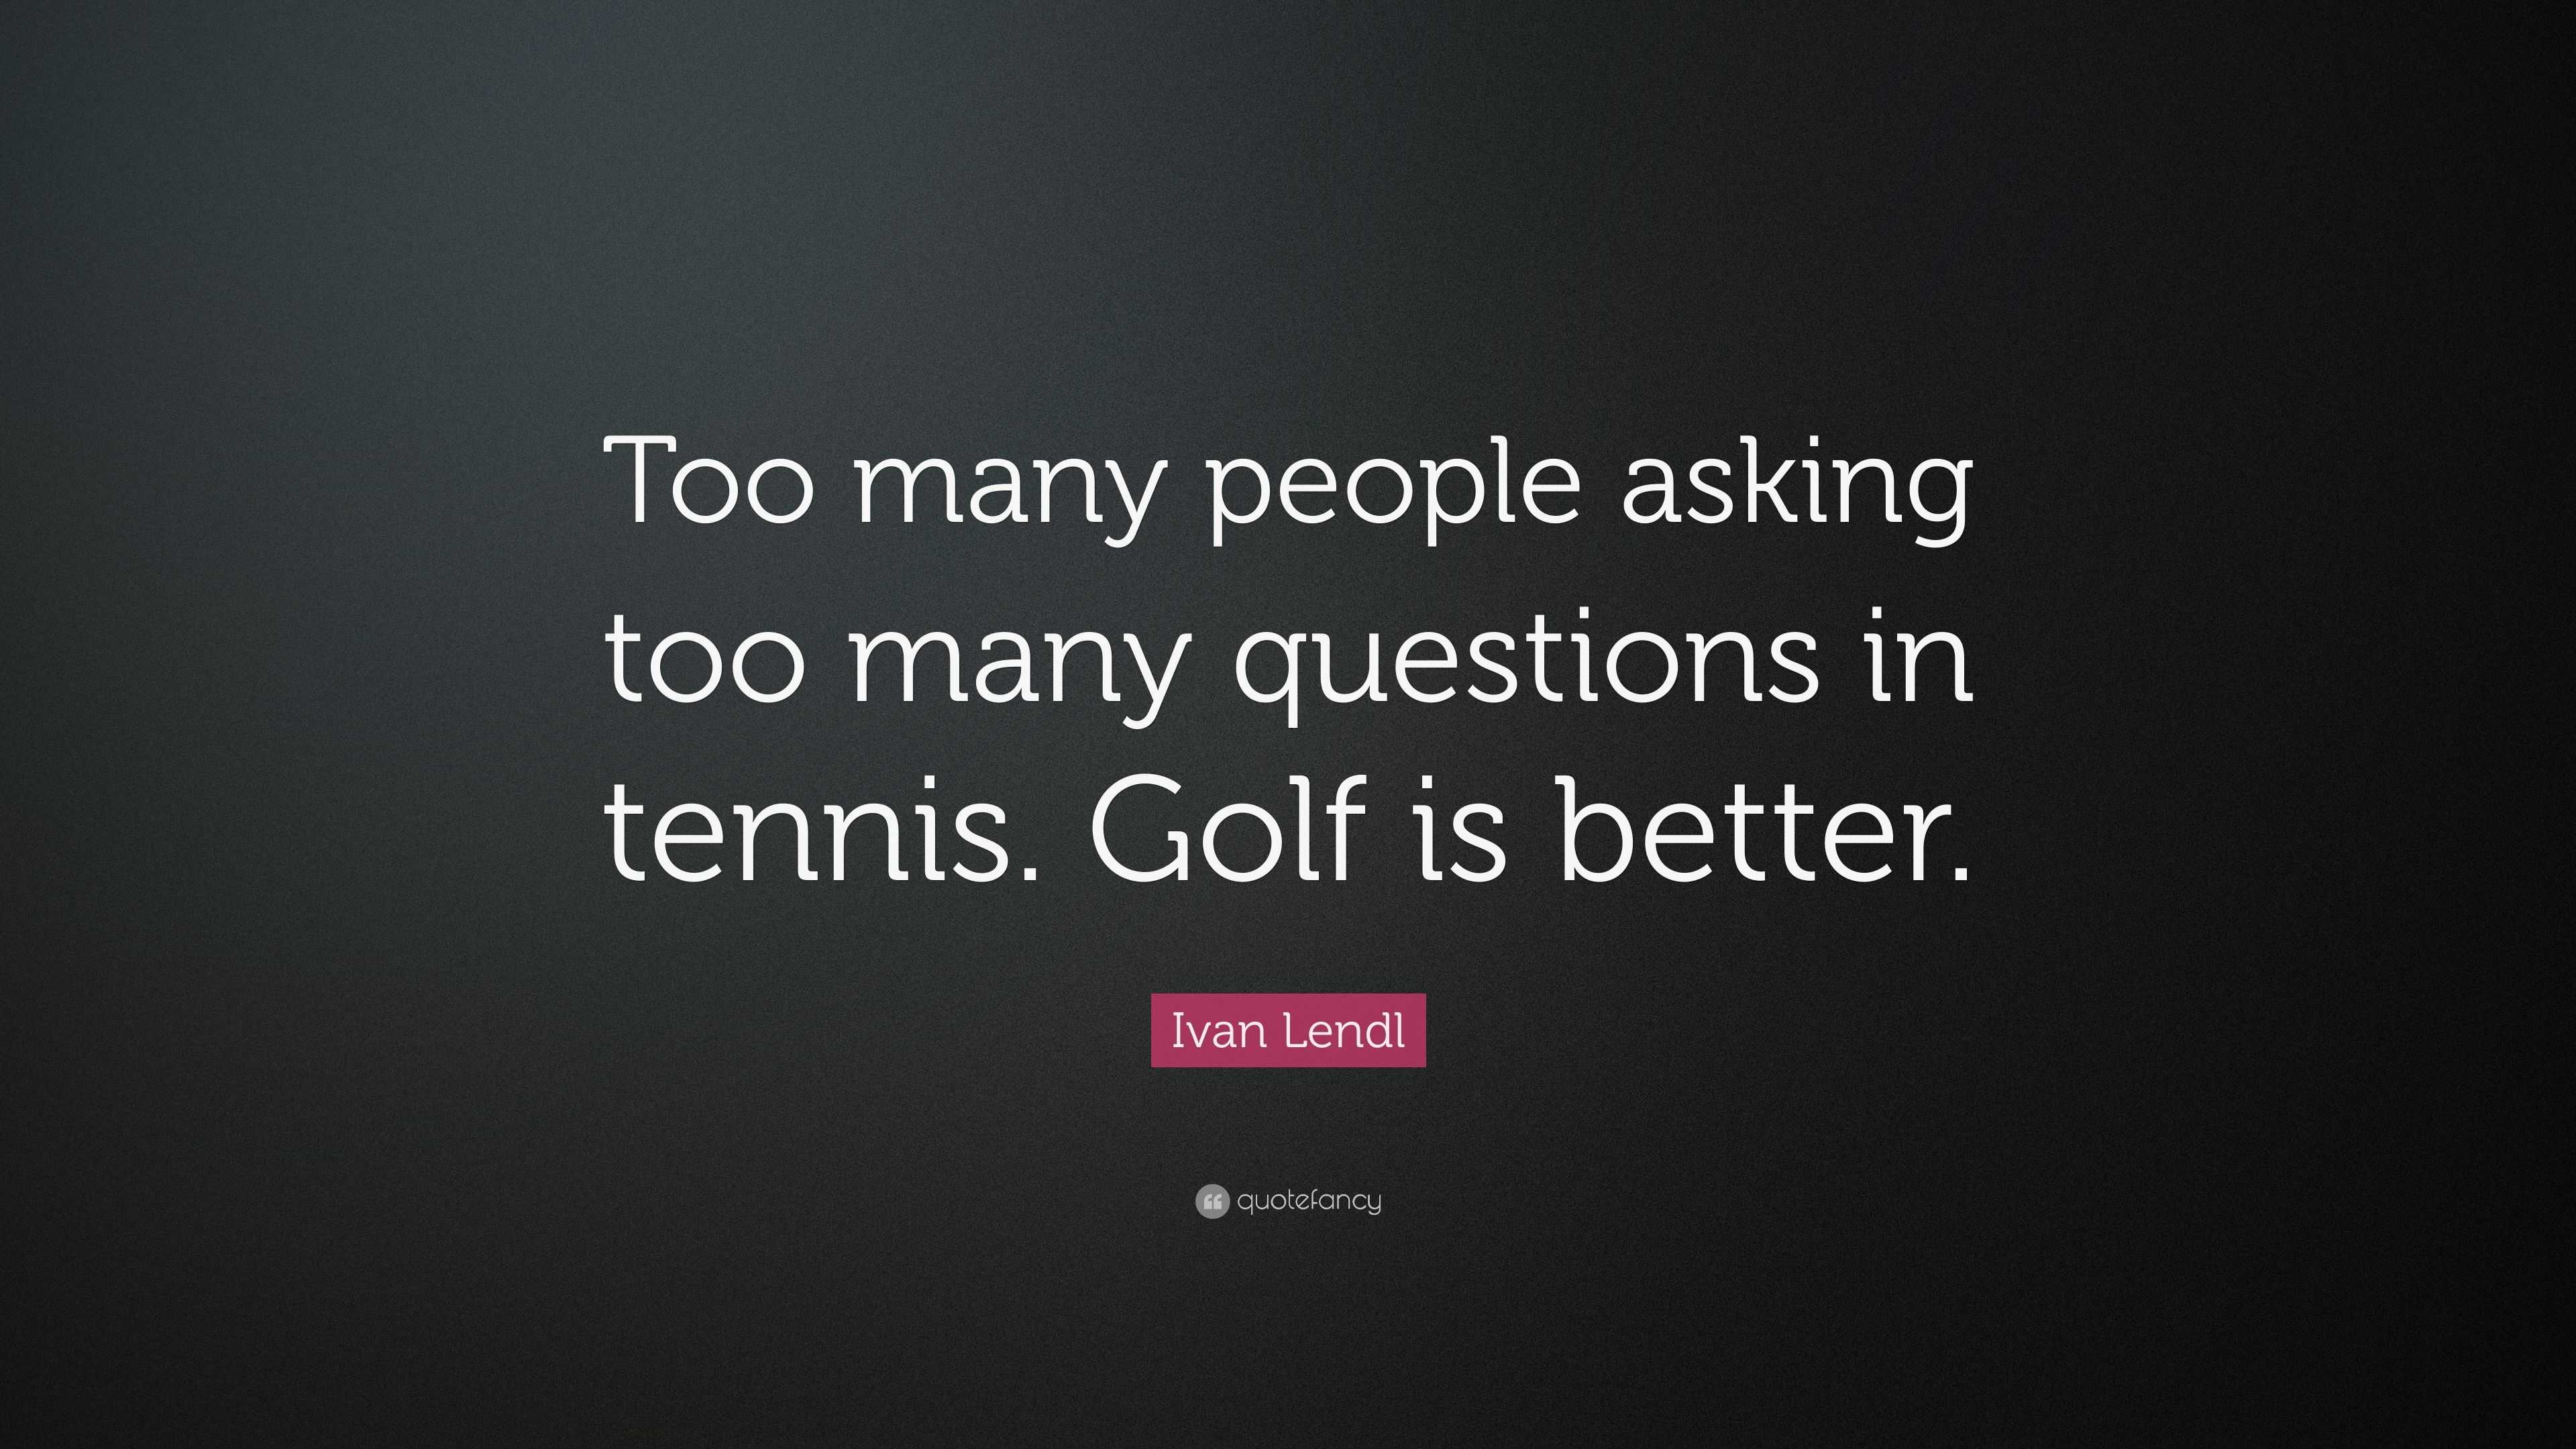 Asking Too Many Questions Quotes | the quotes